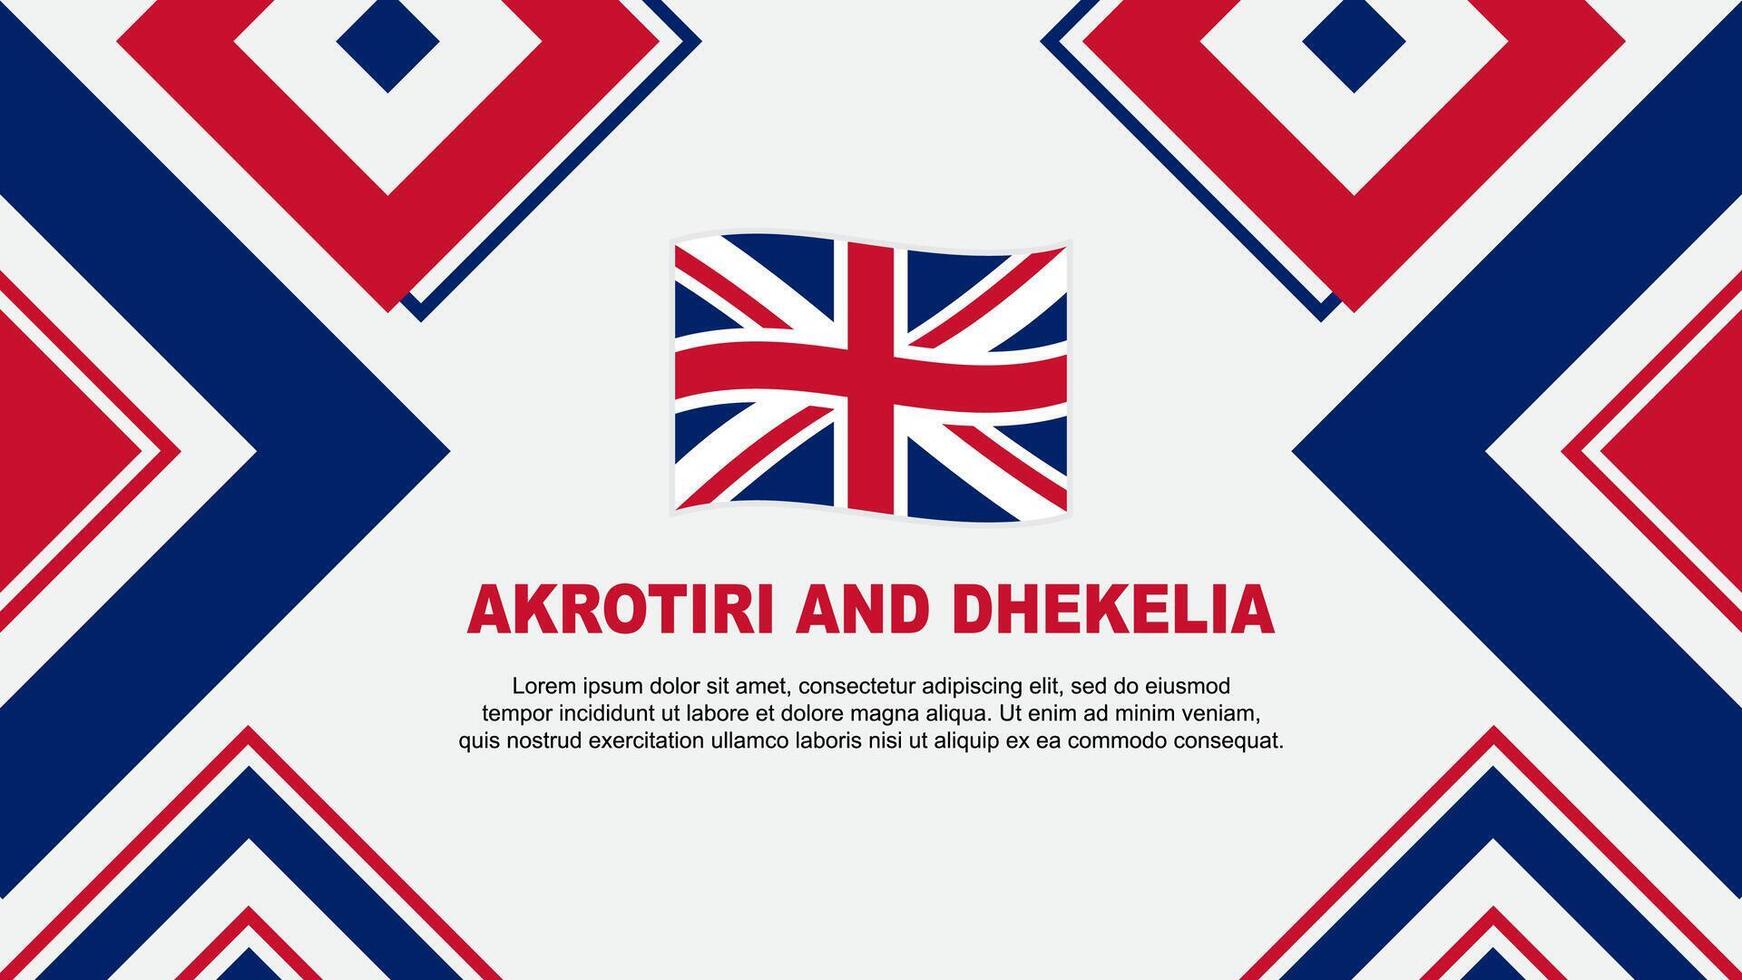 Akrotiri And Dhekelia Flag Abstract Background Design Template. Akrotiri And Dhekelia Independence Day Banner Wallpaper Vector Illustration. Independence Day